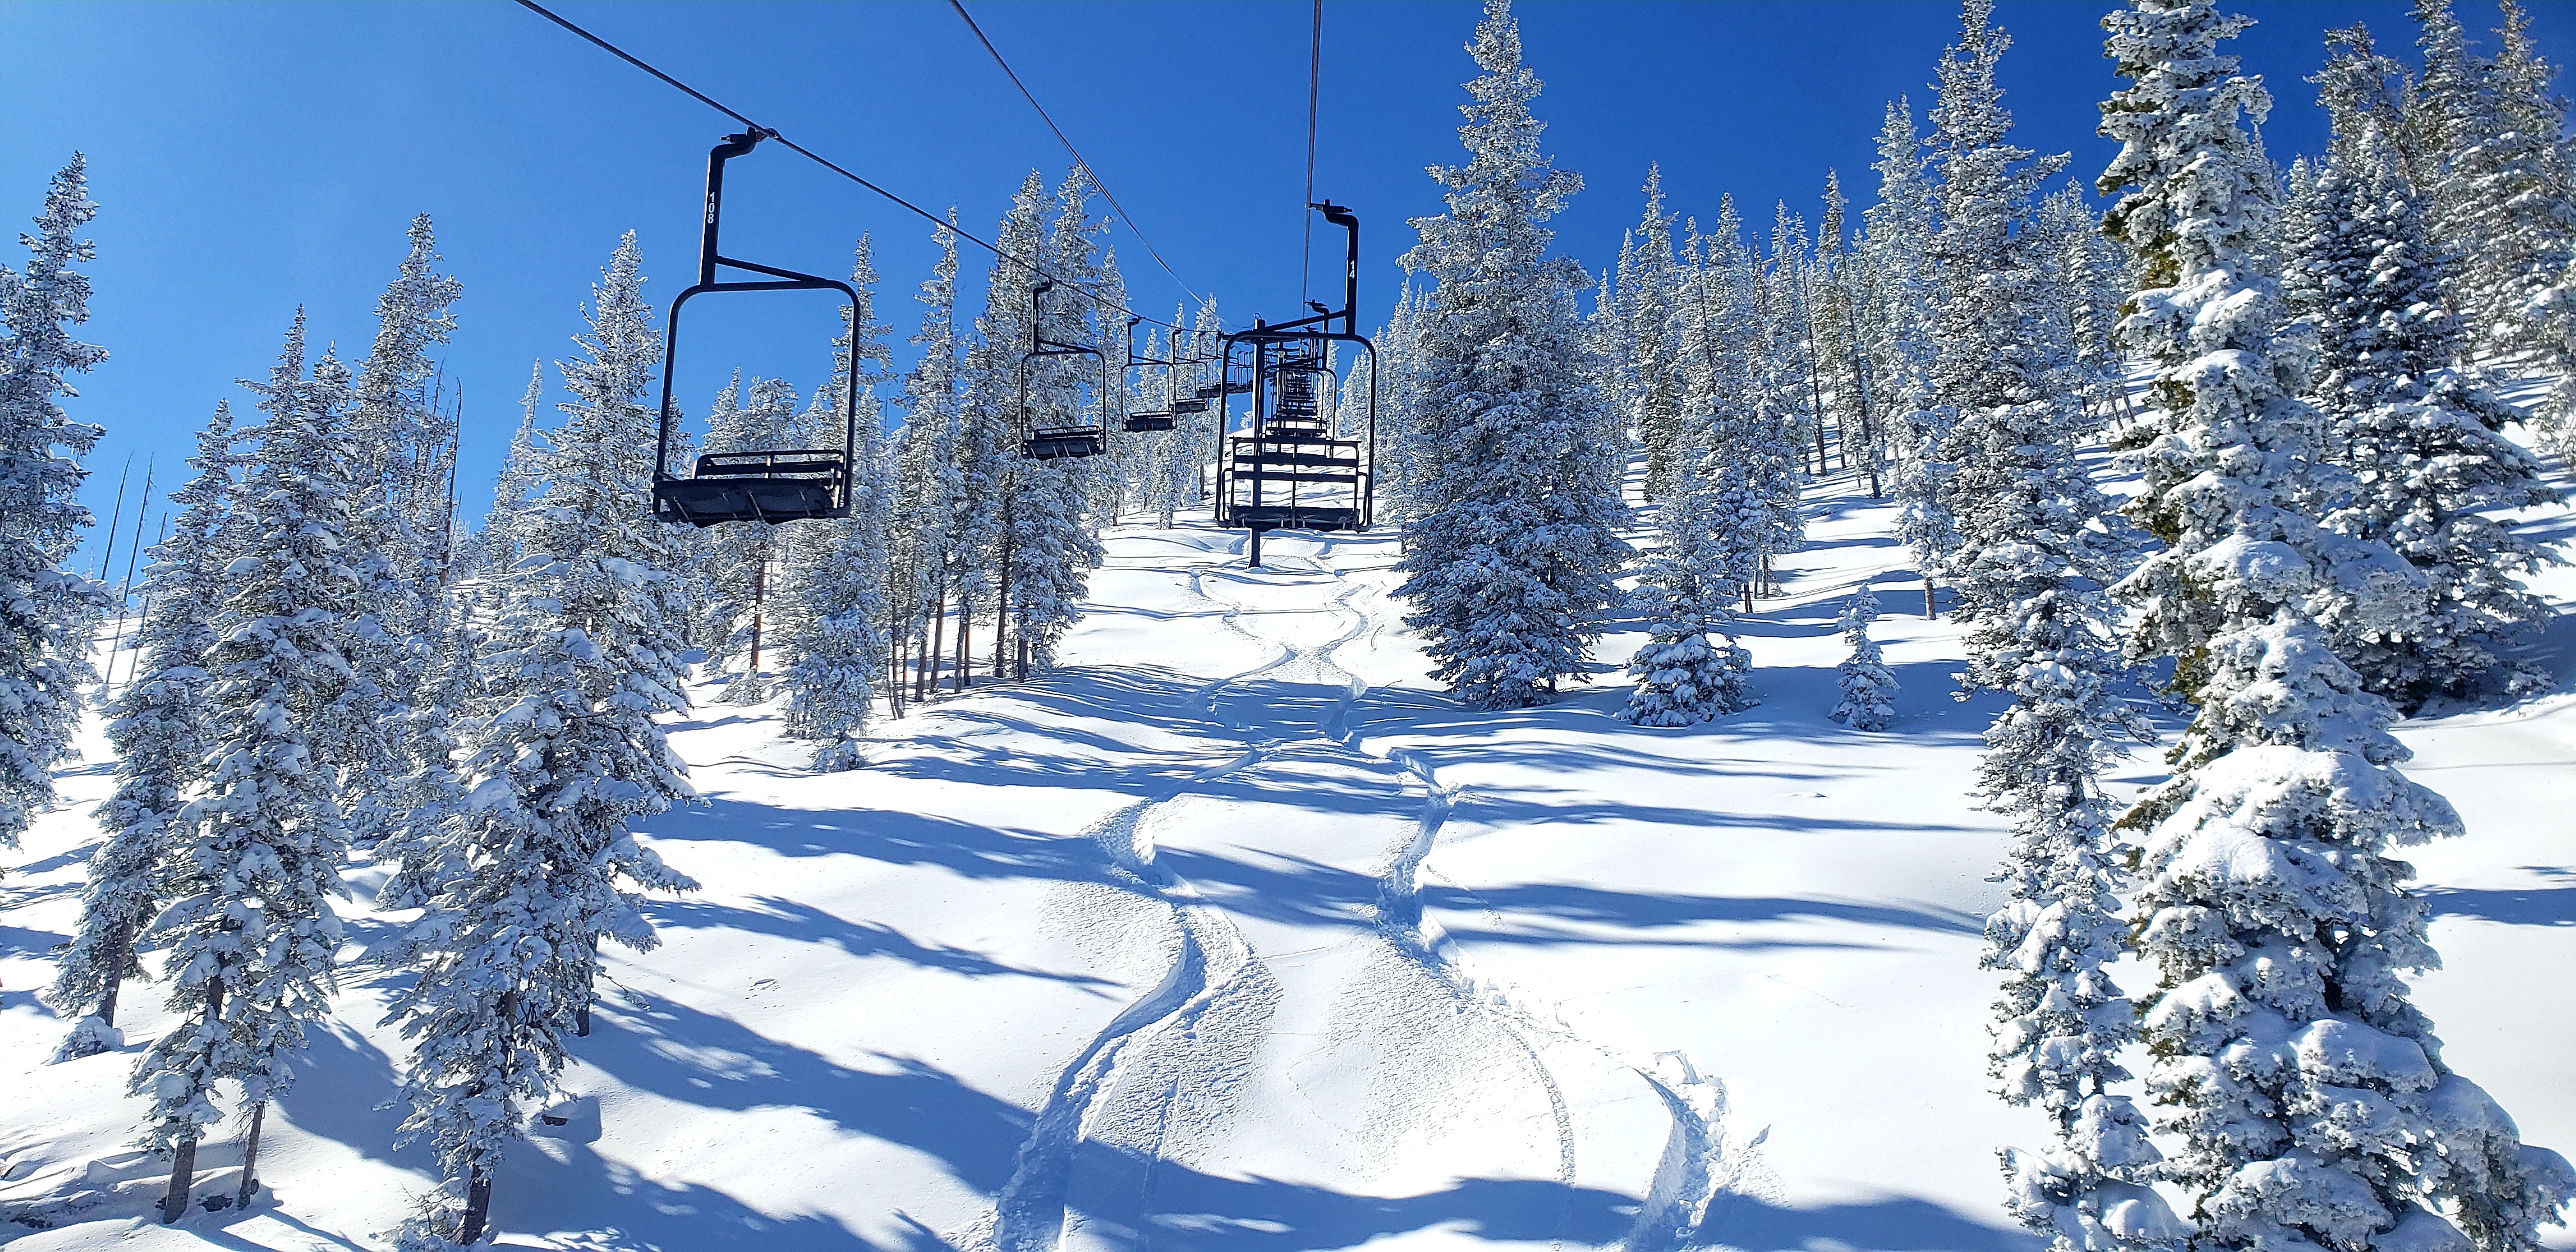 Pano lift with powder turns
